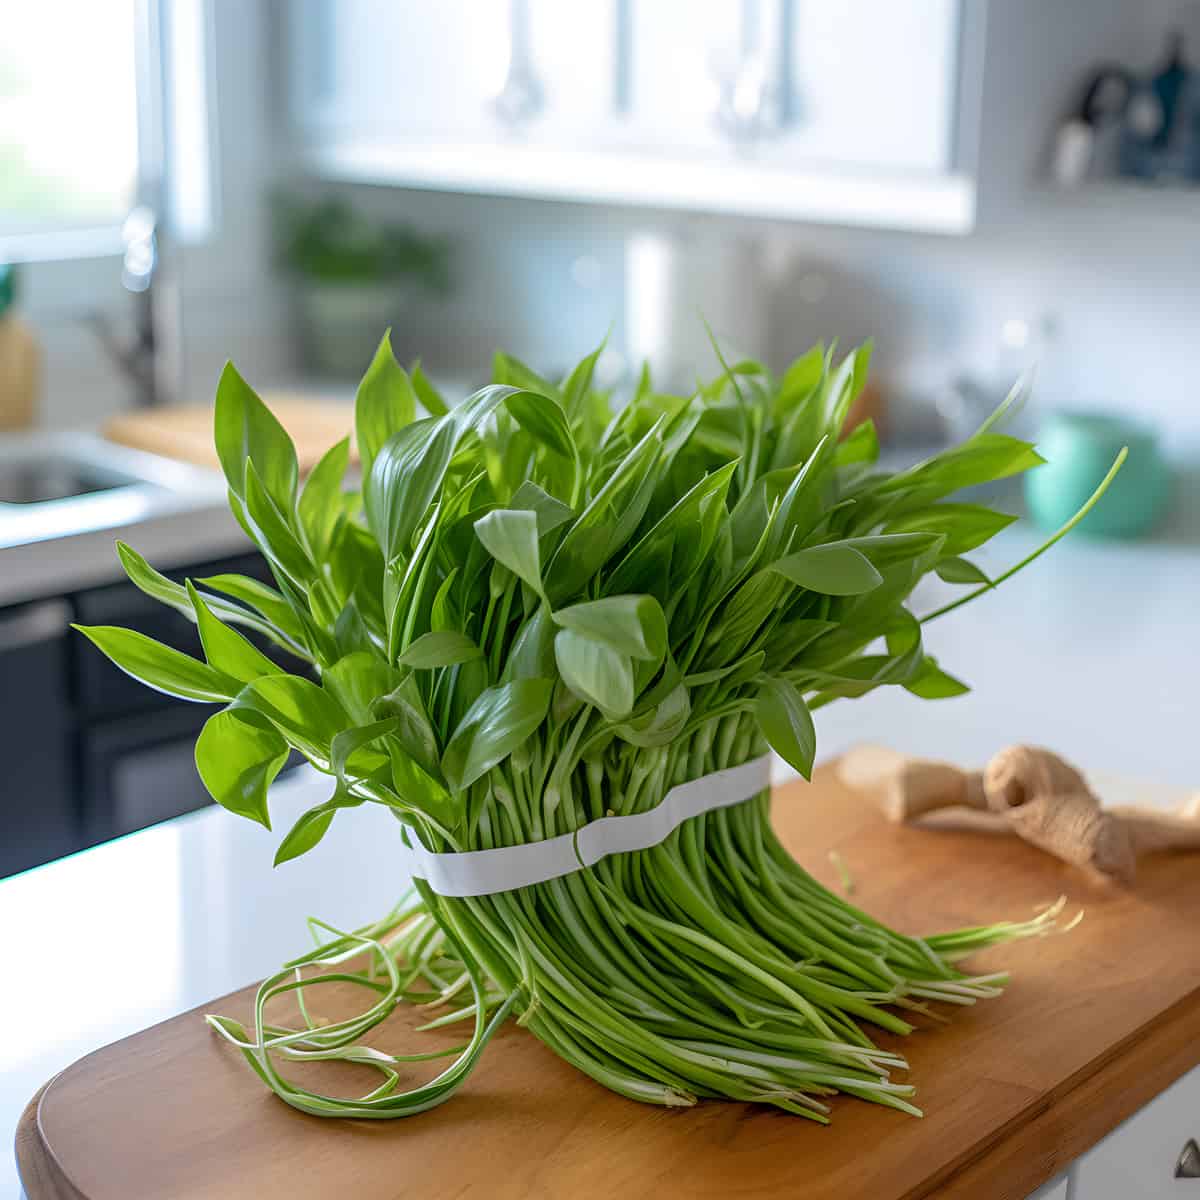 Water Spinach on a kitchen counter